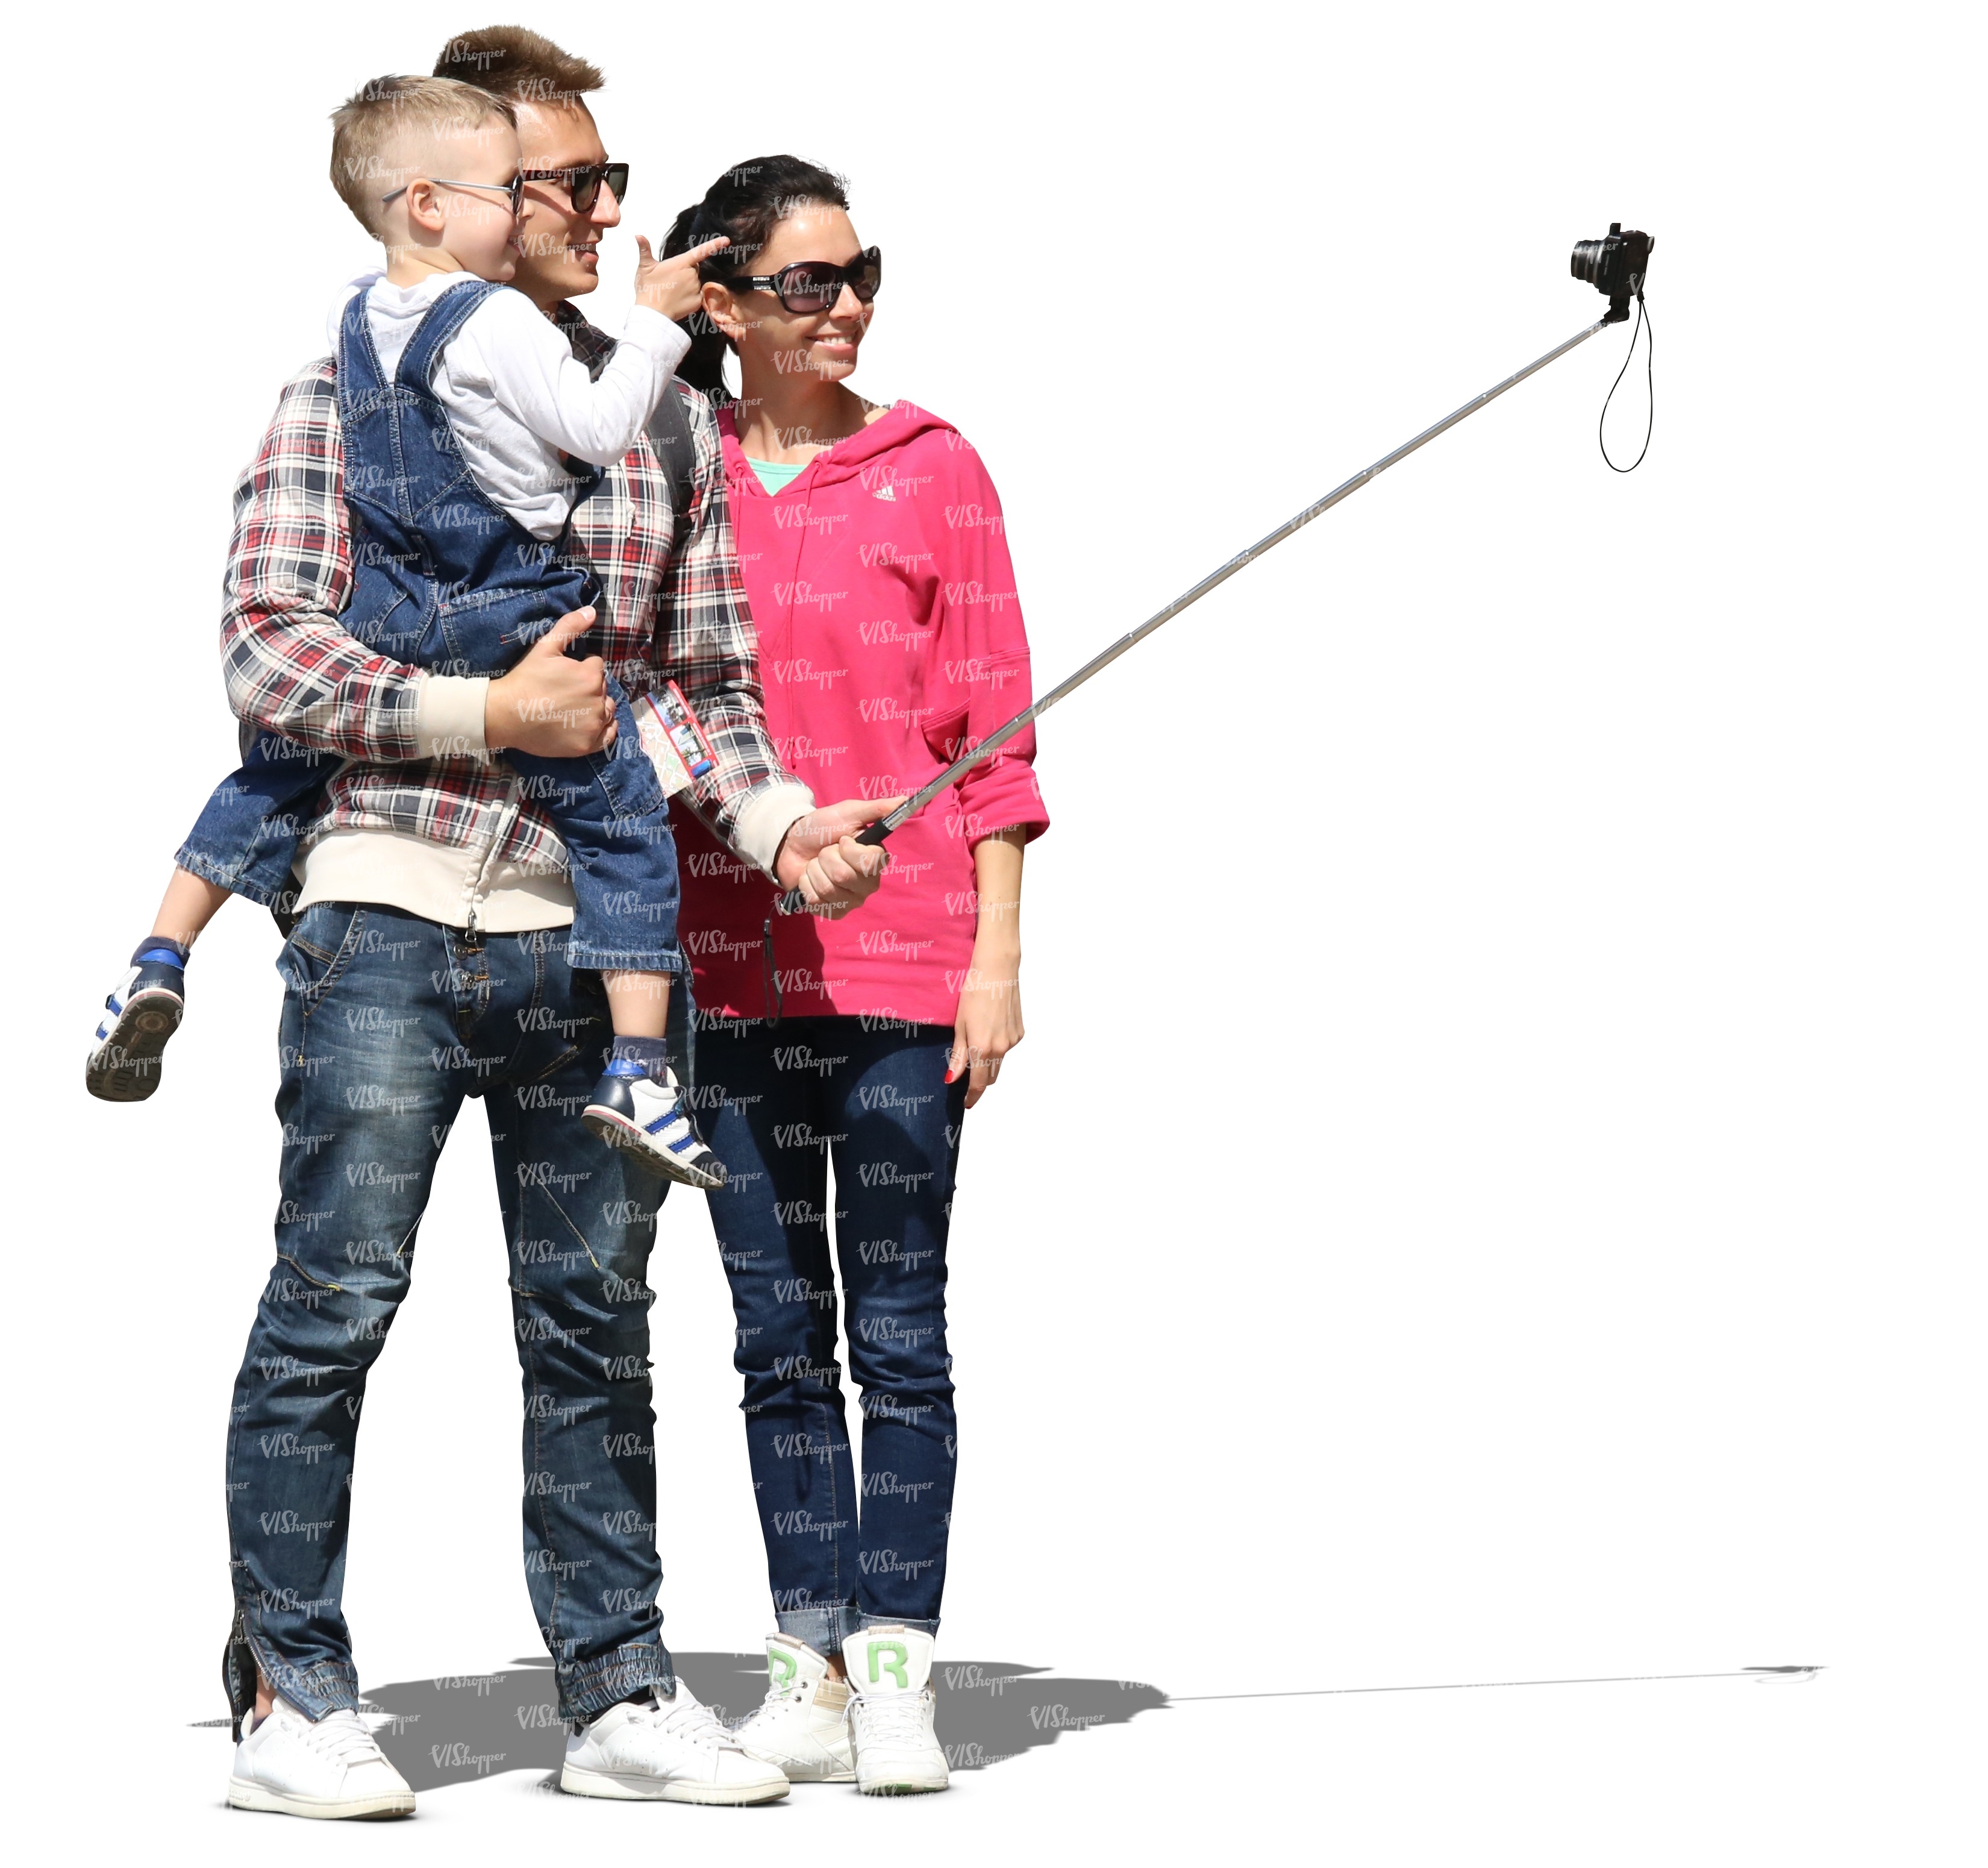 These people 1 taking. It takes two May and Cody. Holding a selfie Rod selfie. ID Front and back and a selfie.